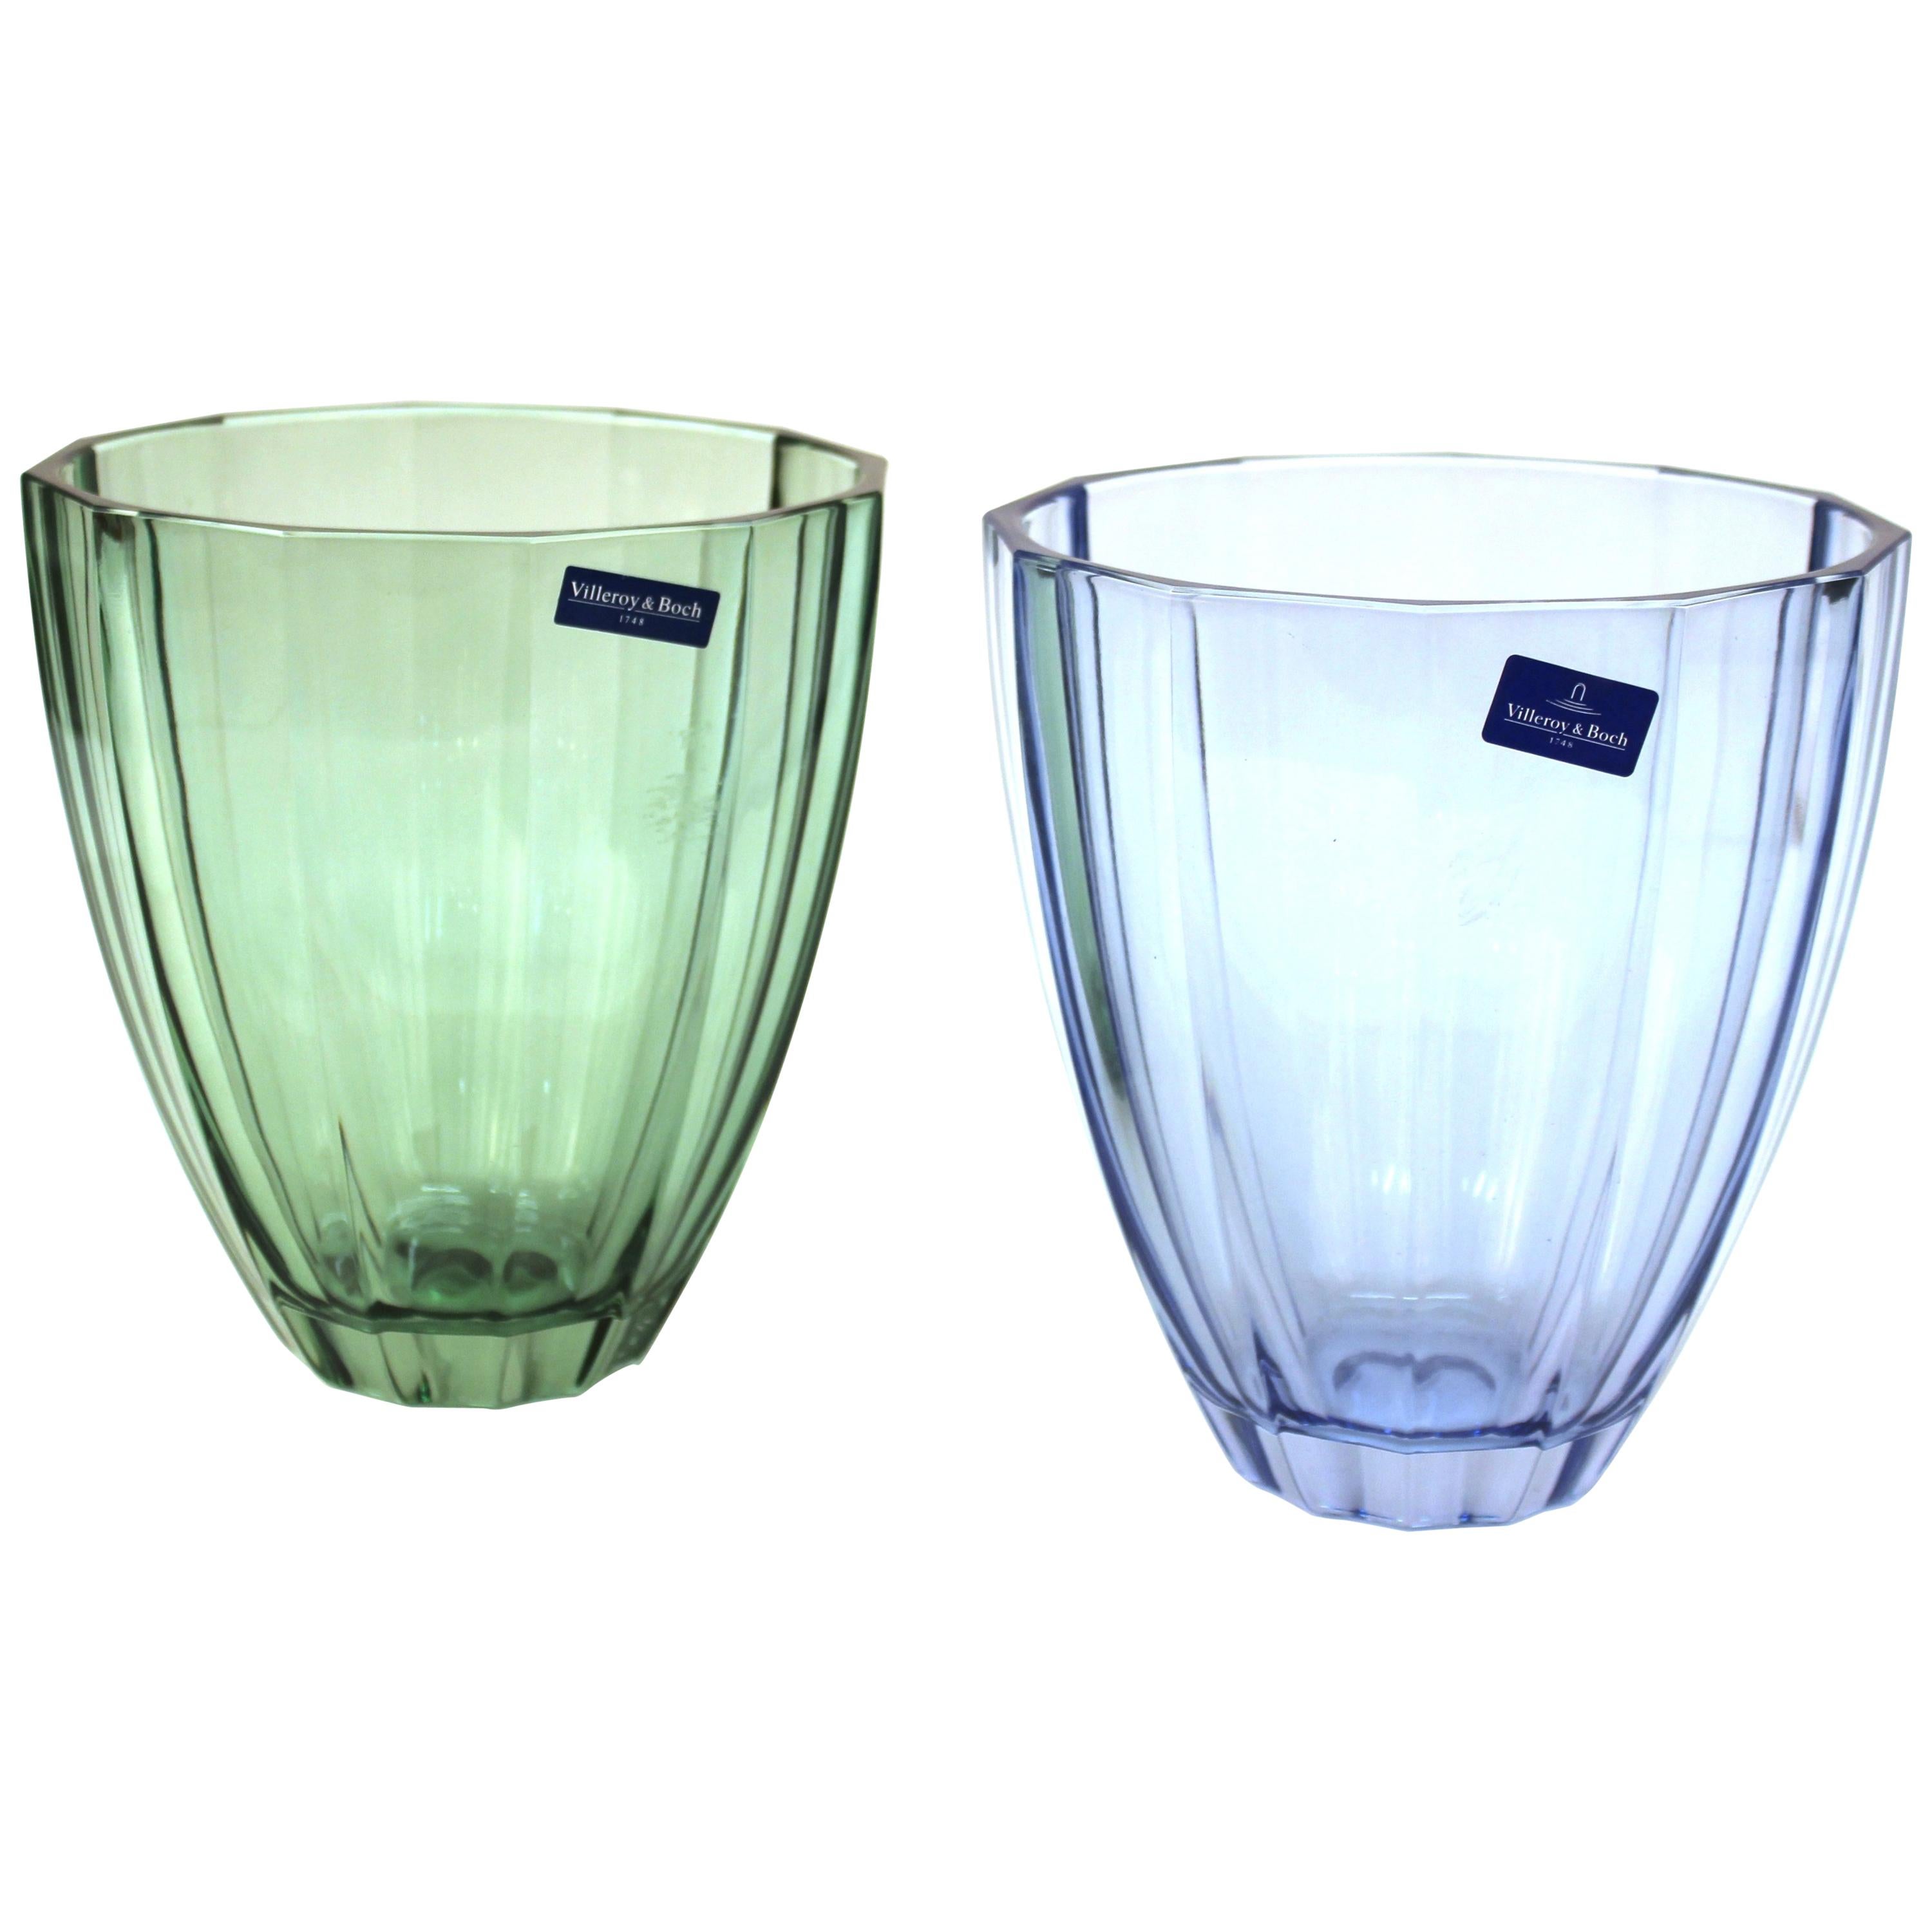 Villeroy & Boch Modern Style Glass Vases in Blue and Green For Sale